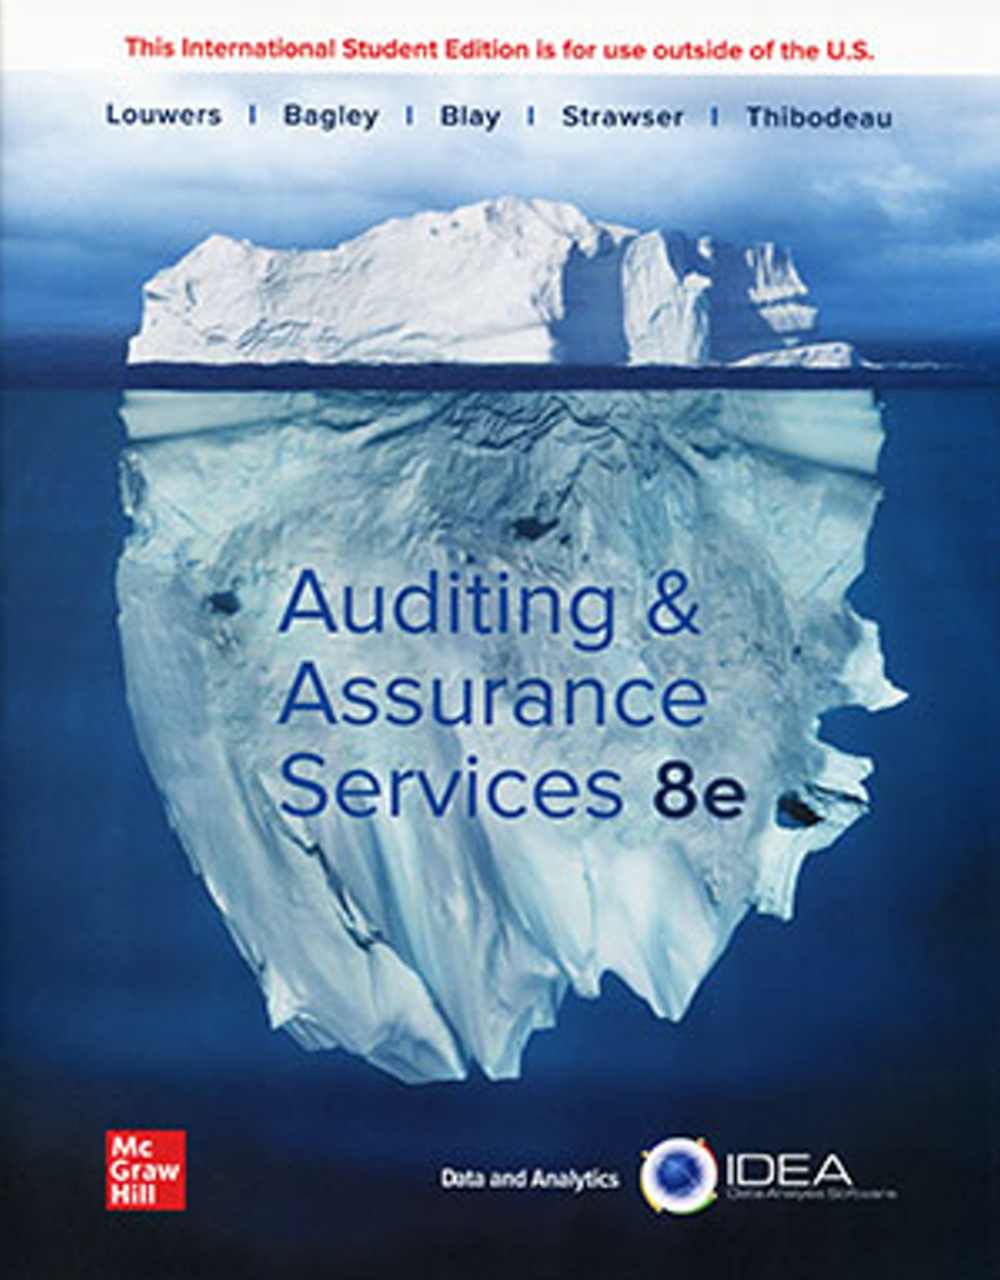 Auditing & Assurance Services(...